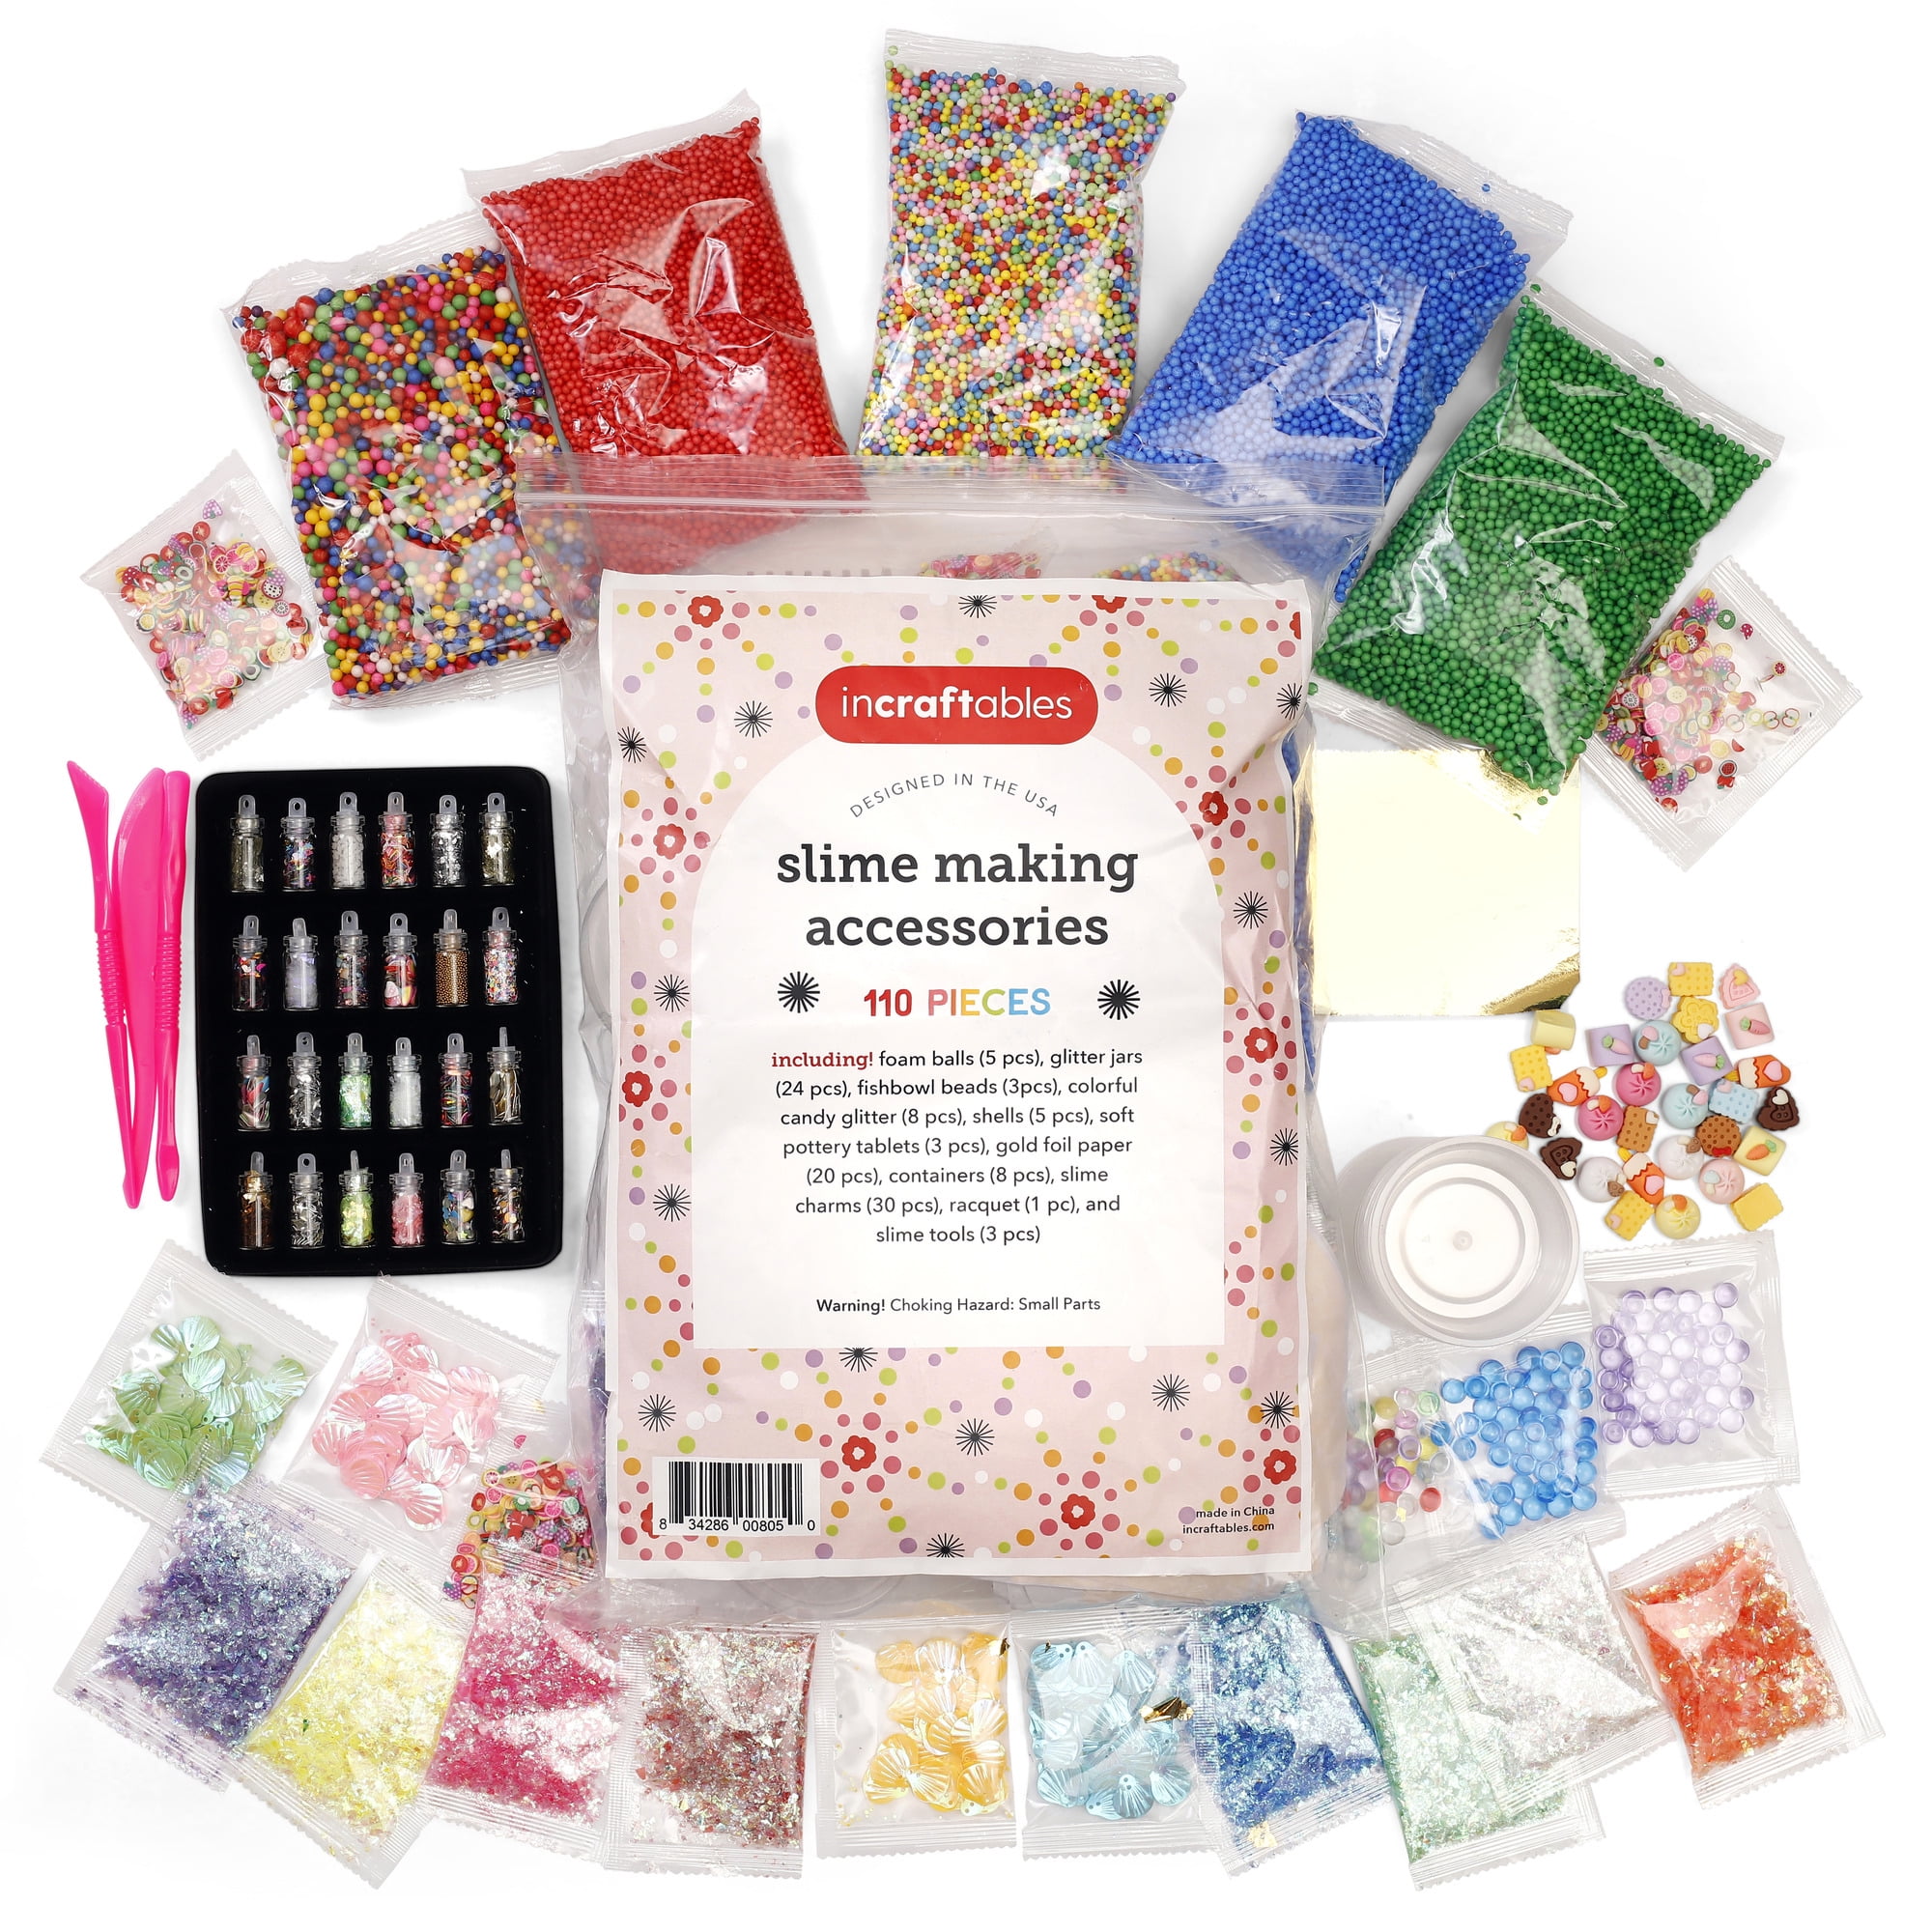 Incraftables Fuse Beads Kit 4000pcs (16 Colors). Best Melting Beads for  Kids Crafts. Mini Melty Fuse Beads for DIY Arts & Gifts. Hama 5mm Iron  Beads for Kids Kit with Pegboard, Plucker